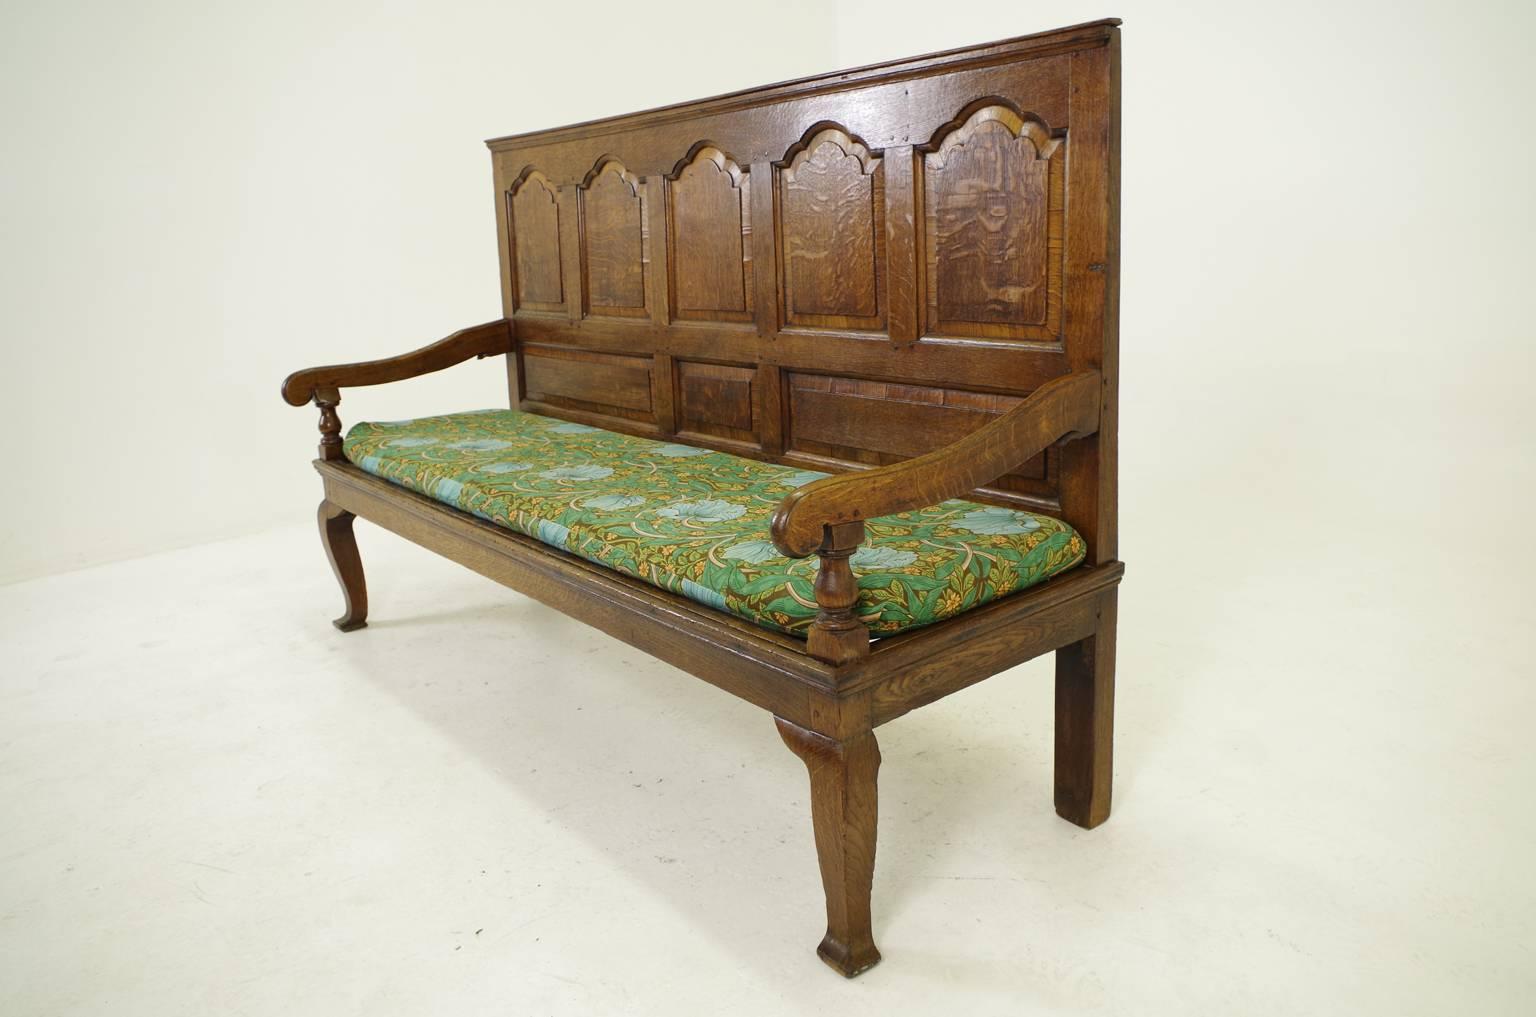 - $2150.00
 - Scotland, 1780
 - Fine raised, fielded panels
 - Down swept arms
 - Rectangular cushion on slatted seat
 - Cabriole legs with pad feet
 - Solid oak construction, lovely patina
 - 1 slat missing, some chips on feet
 - 72″w x